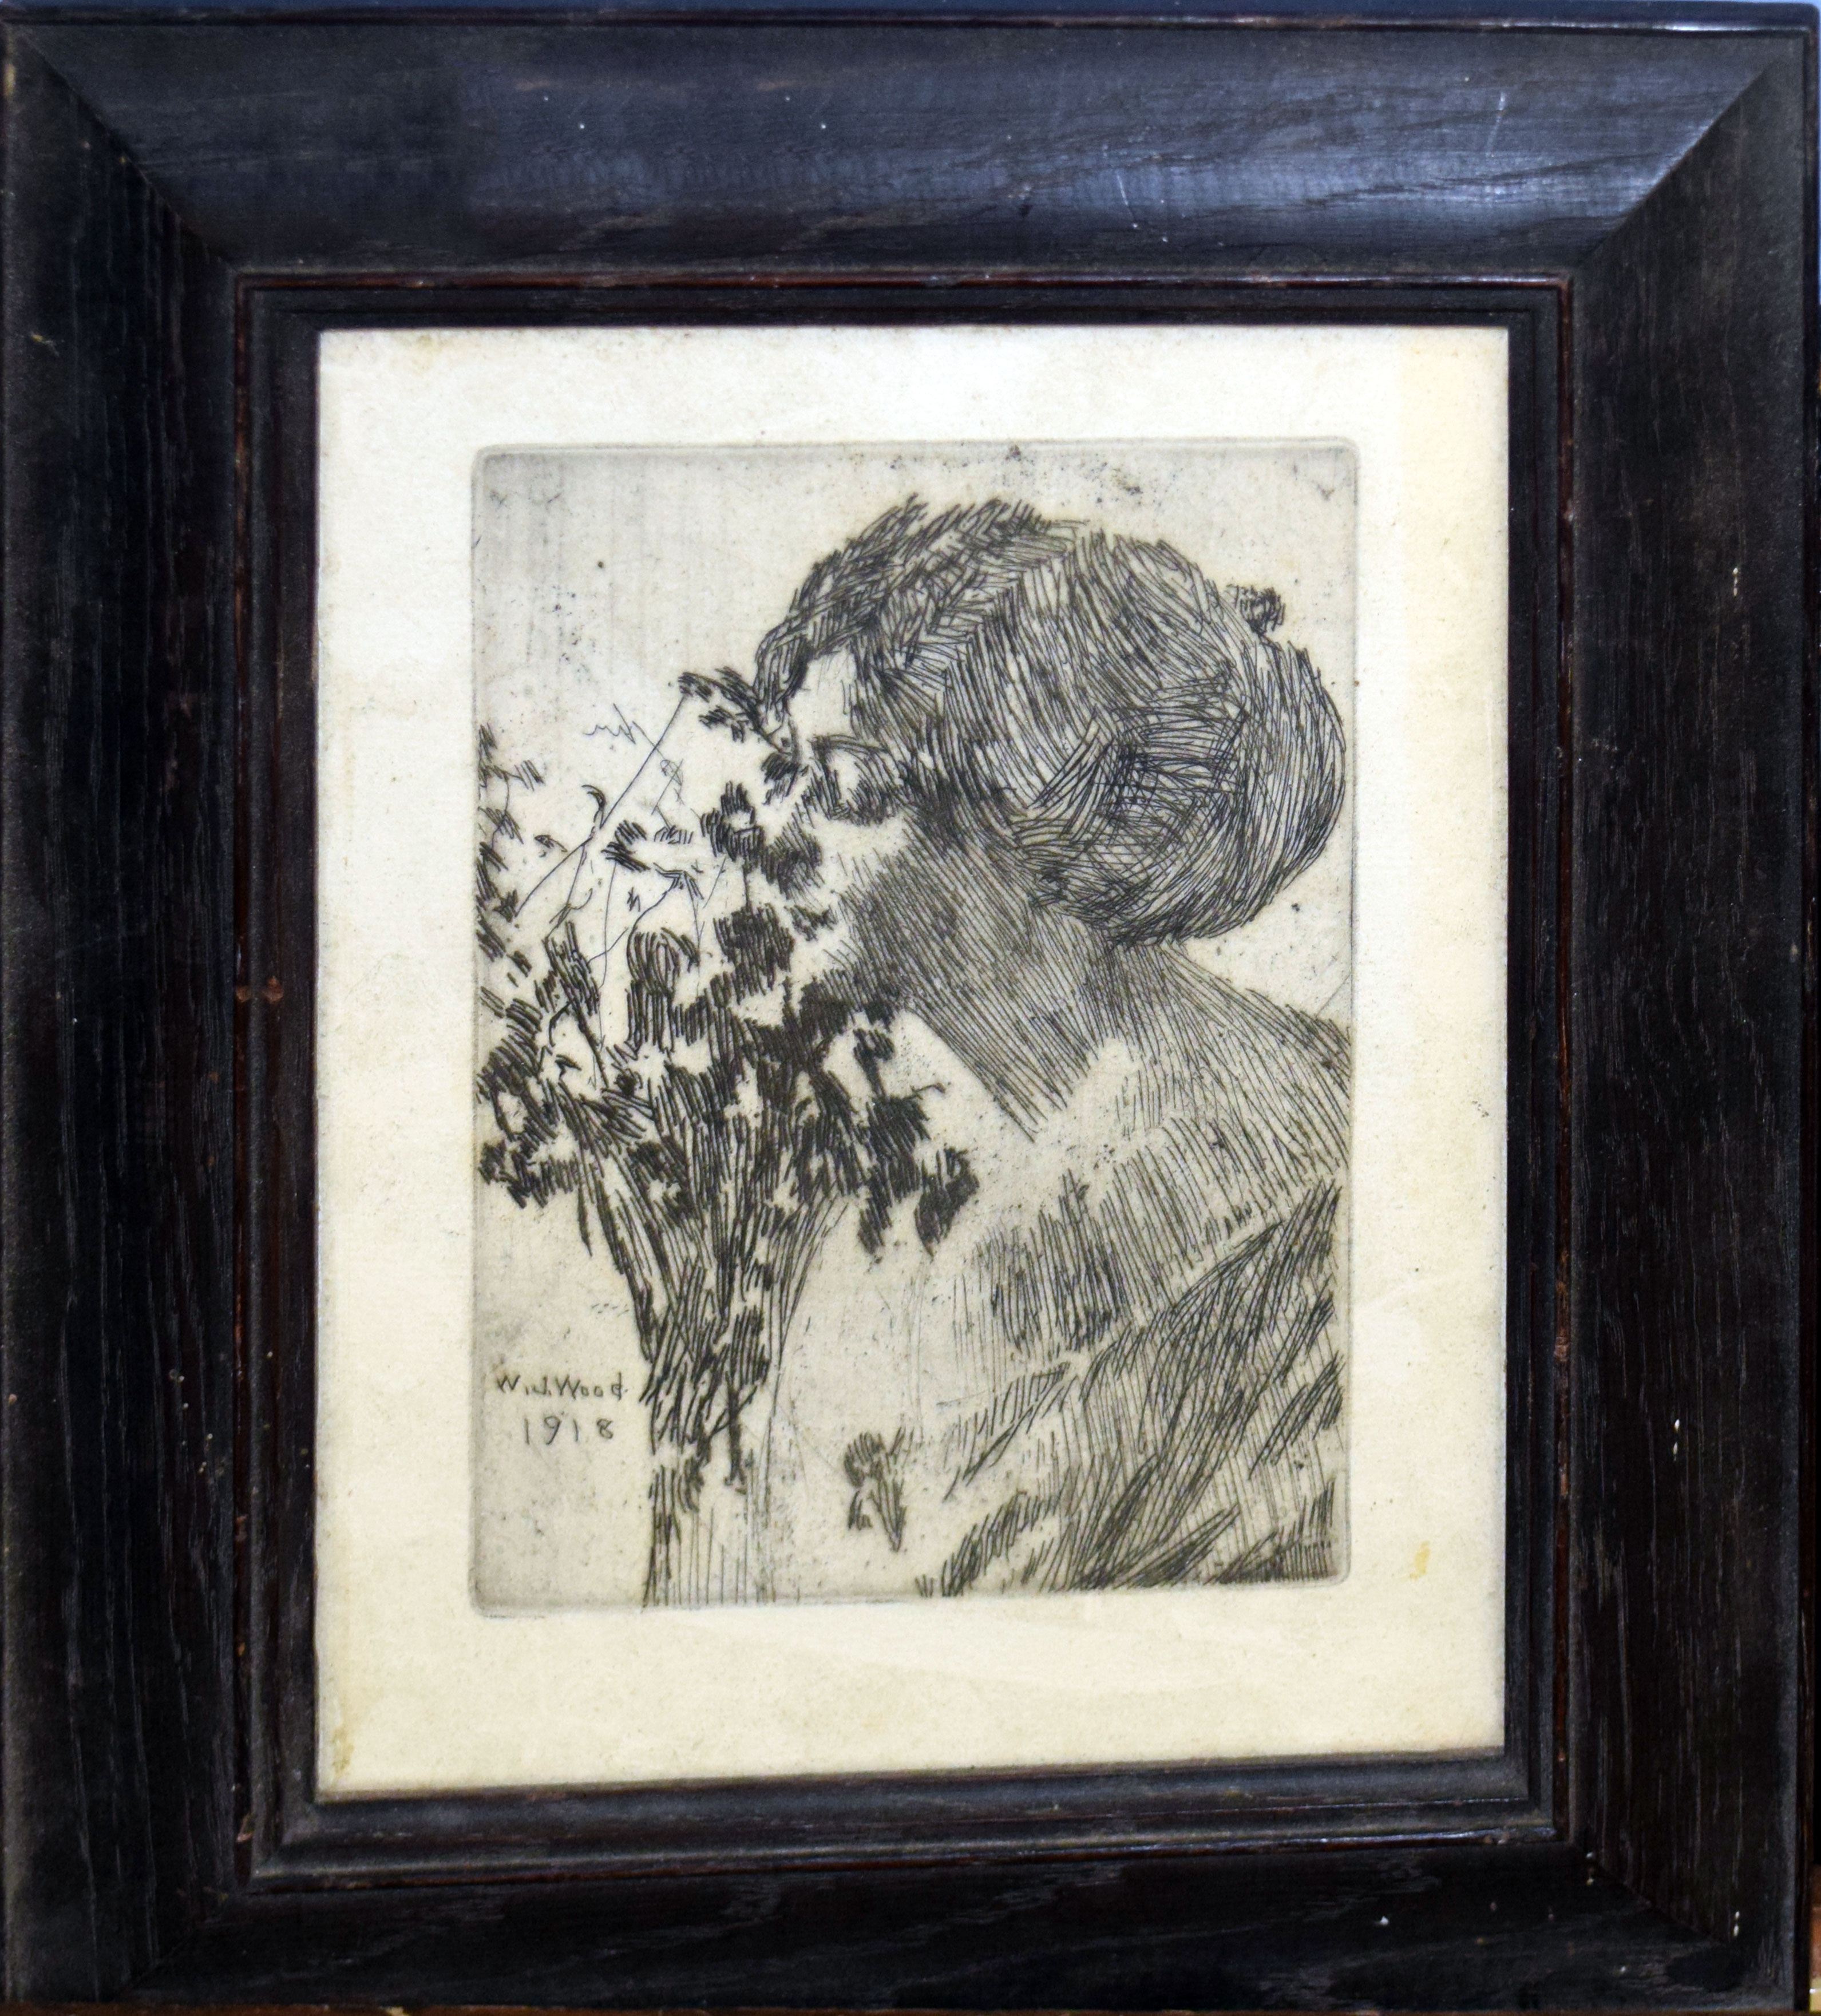 After William John Wood, Lady with flowers, black and white etching, 17 x 13cm